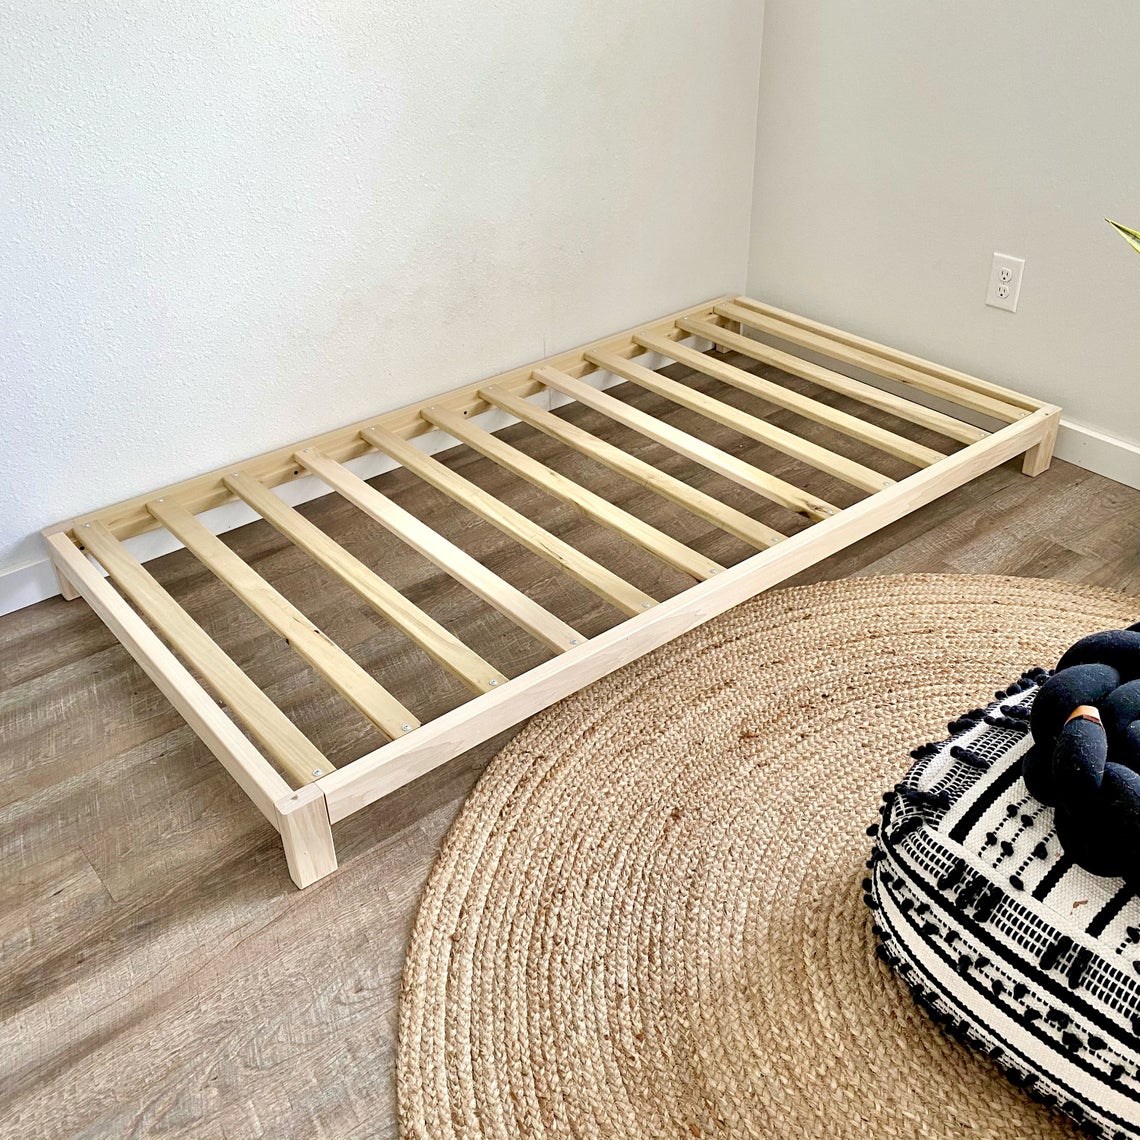  A solid wood platform bed featuring a minimalist design with a sleek, arch-shaped railing. The bed frame is crafted from sturdy, natural wood with a smooth finish, providing a modern and elegant sleeping space.